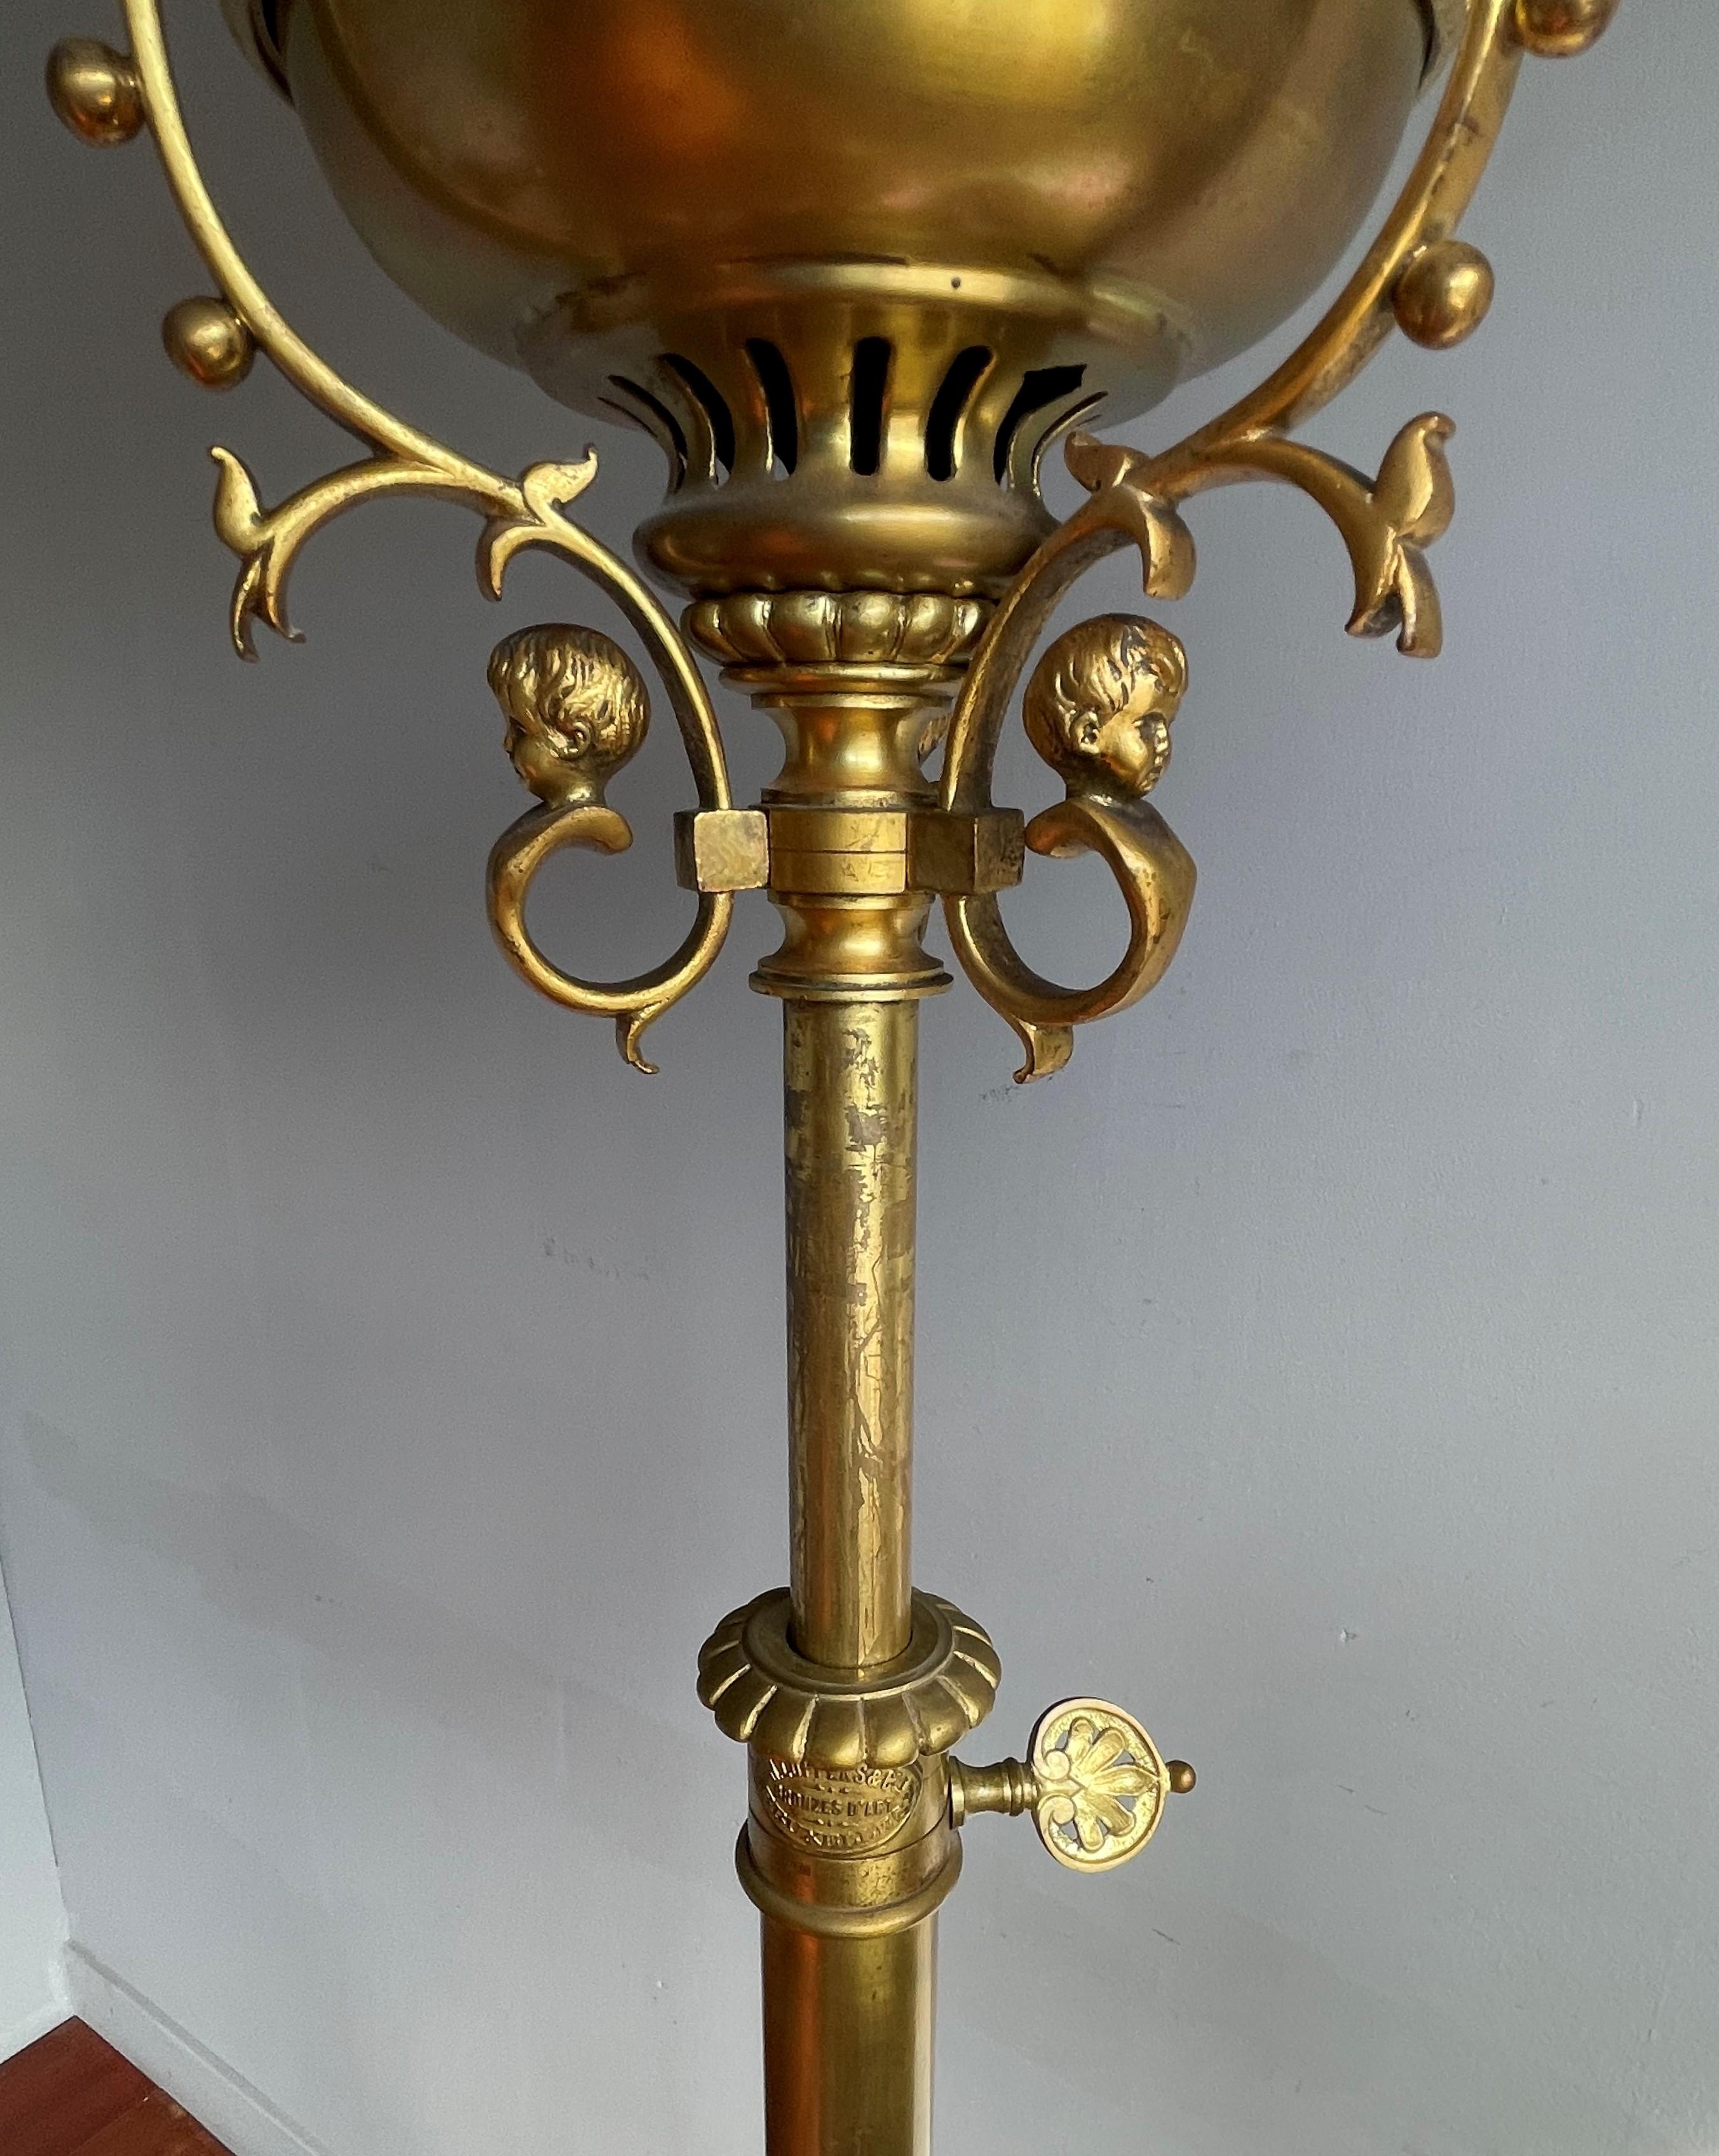 Stunning 19th Century Empire Revival Bronze & Glass Oil Floor Lamp By H. Luppens For Sale 3